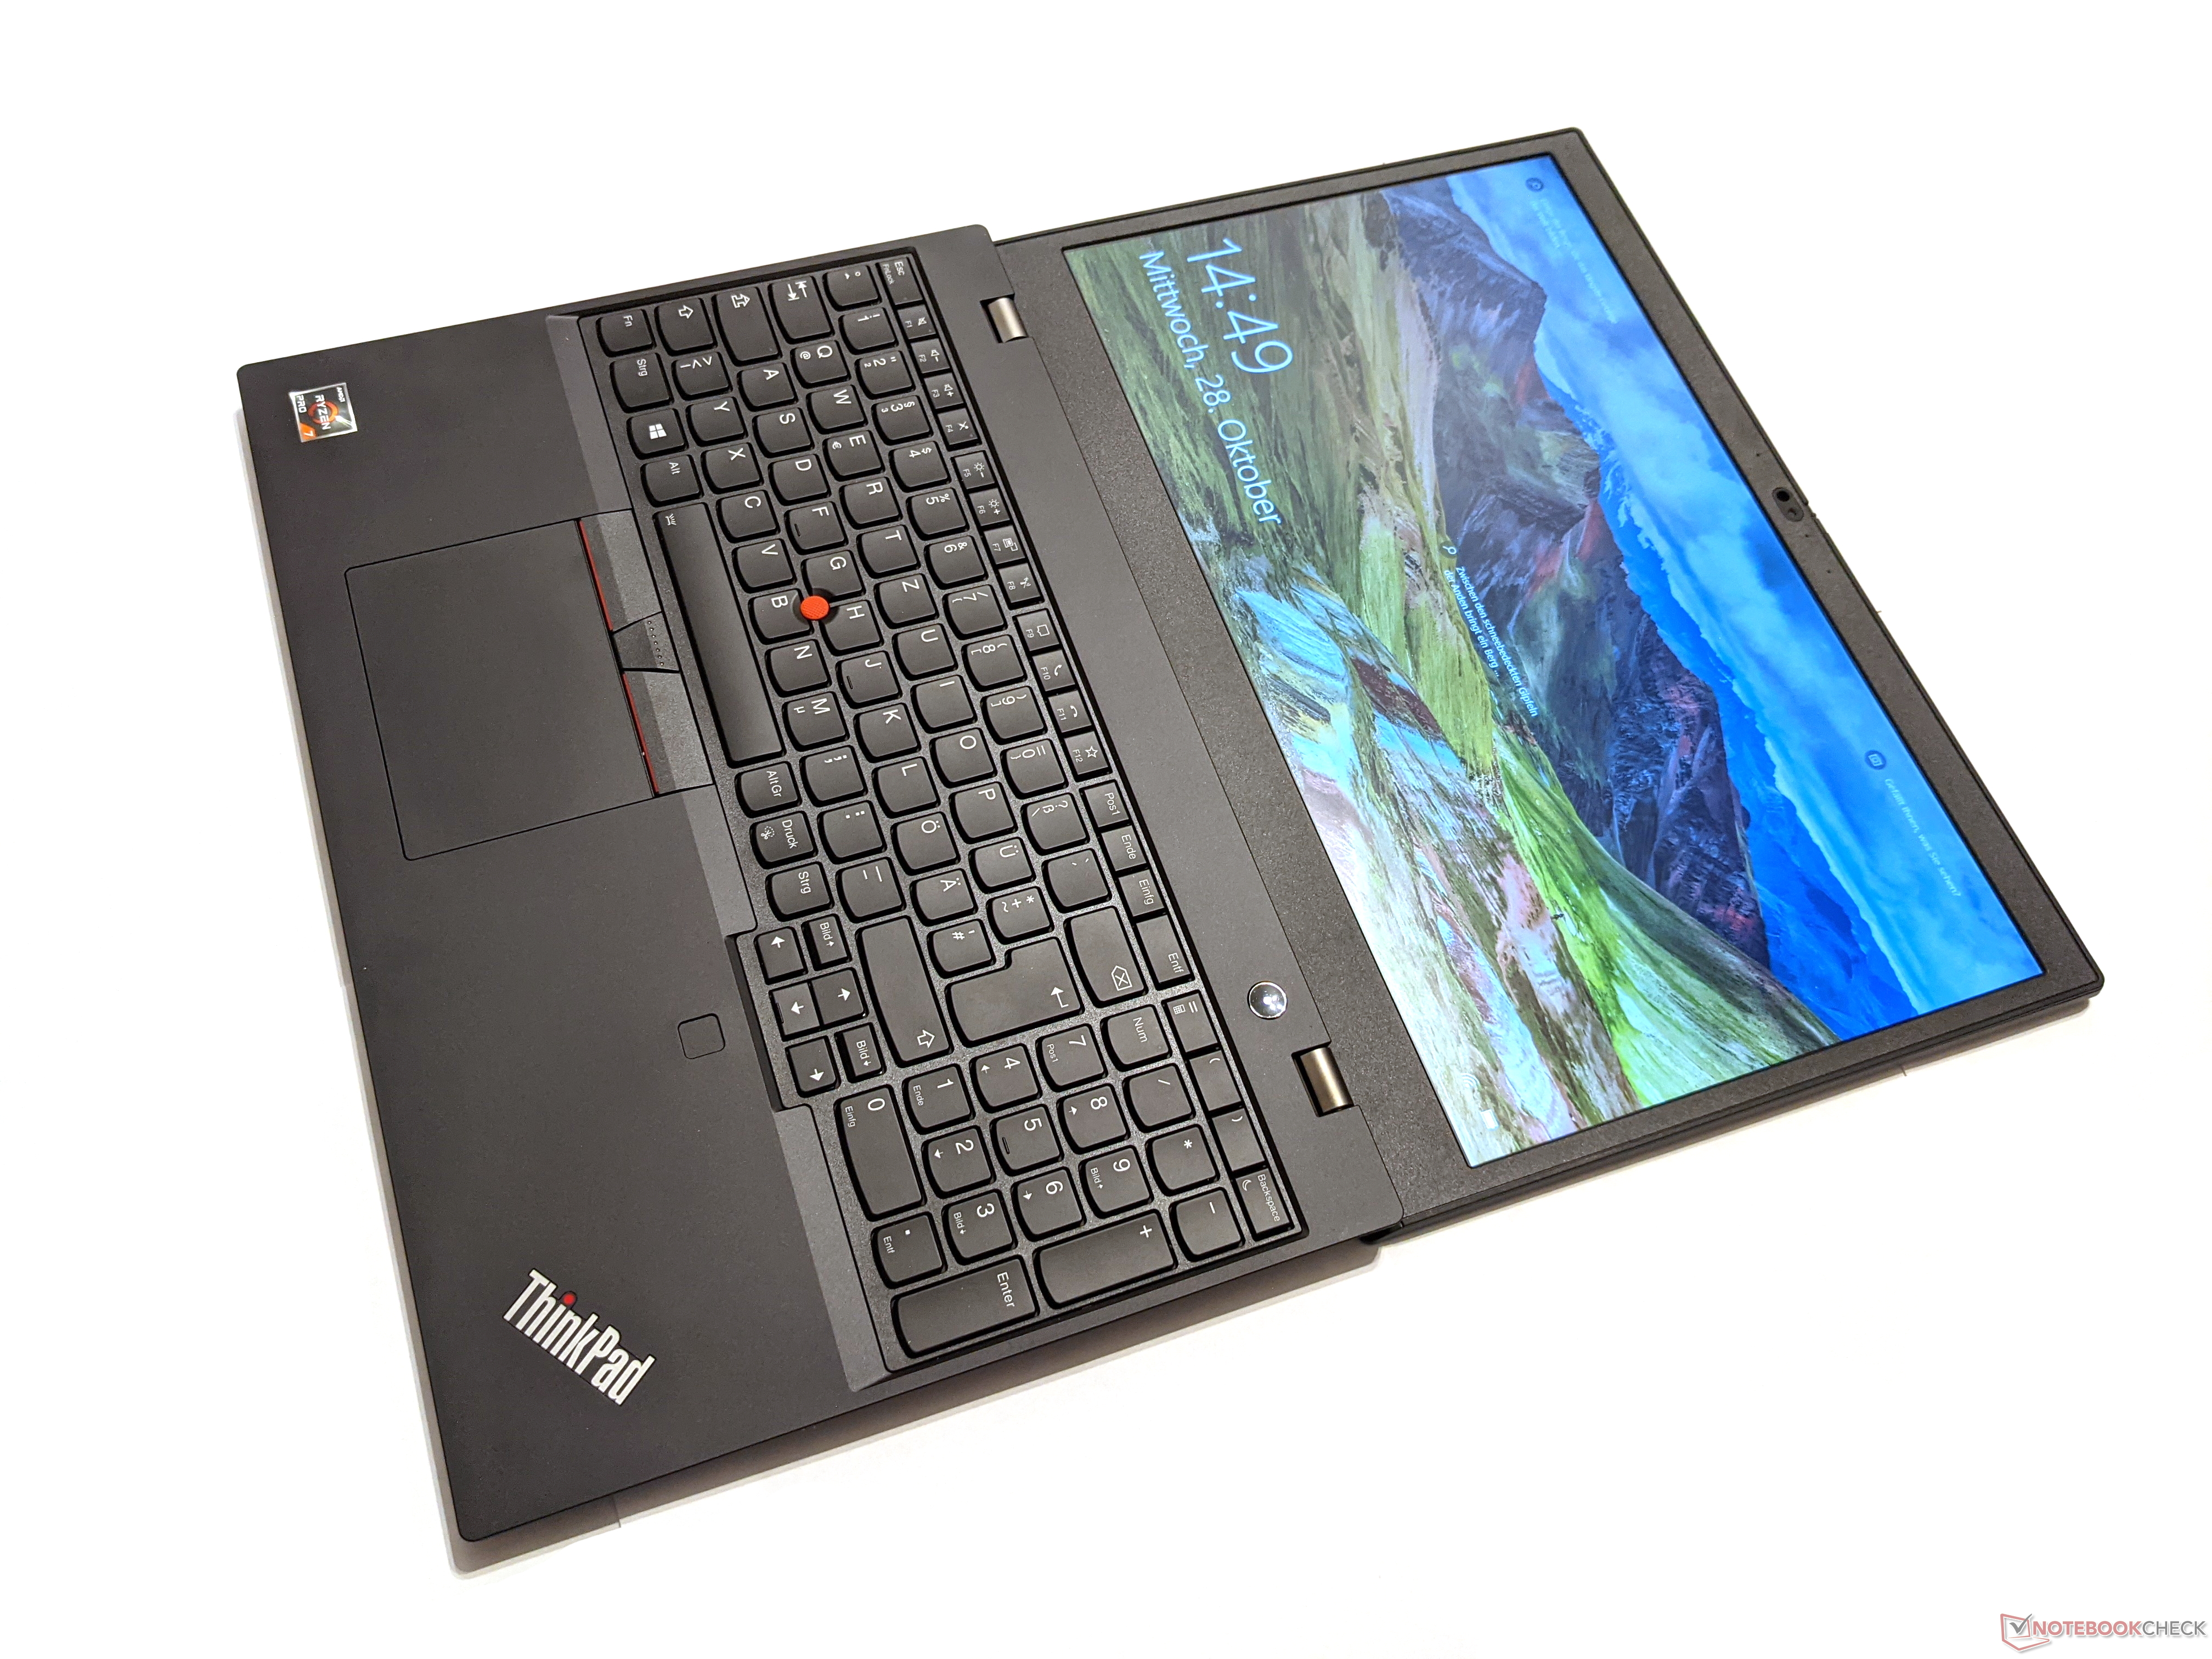 The Lenovo ThinkPad L15 combines the old winning concept with an 